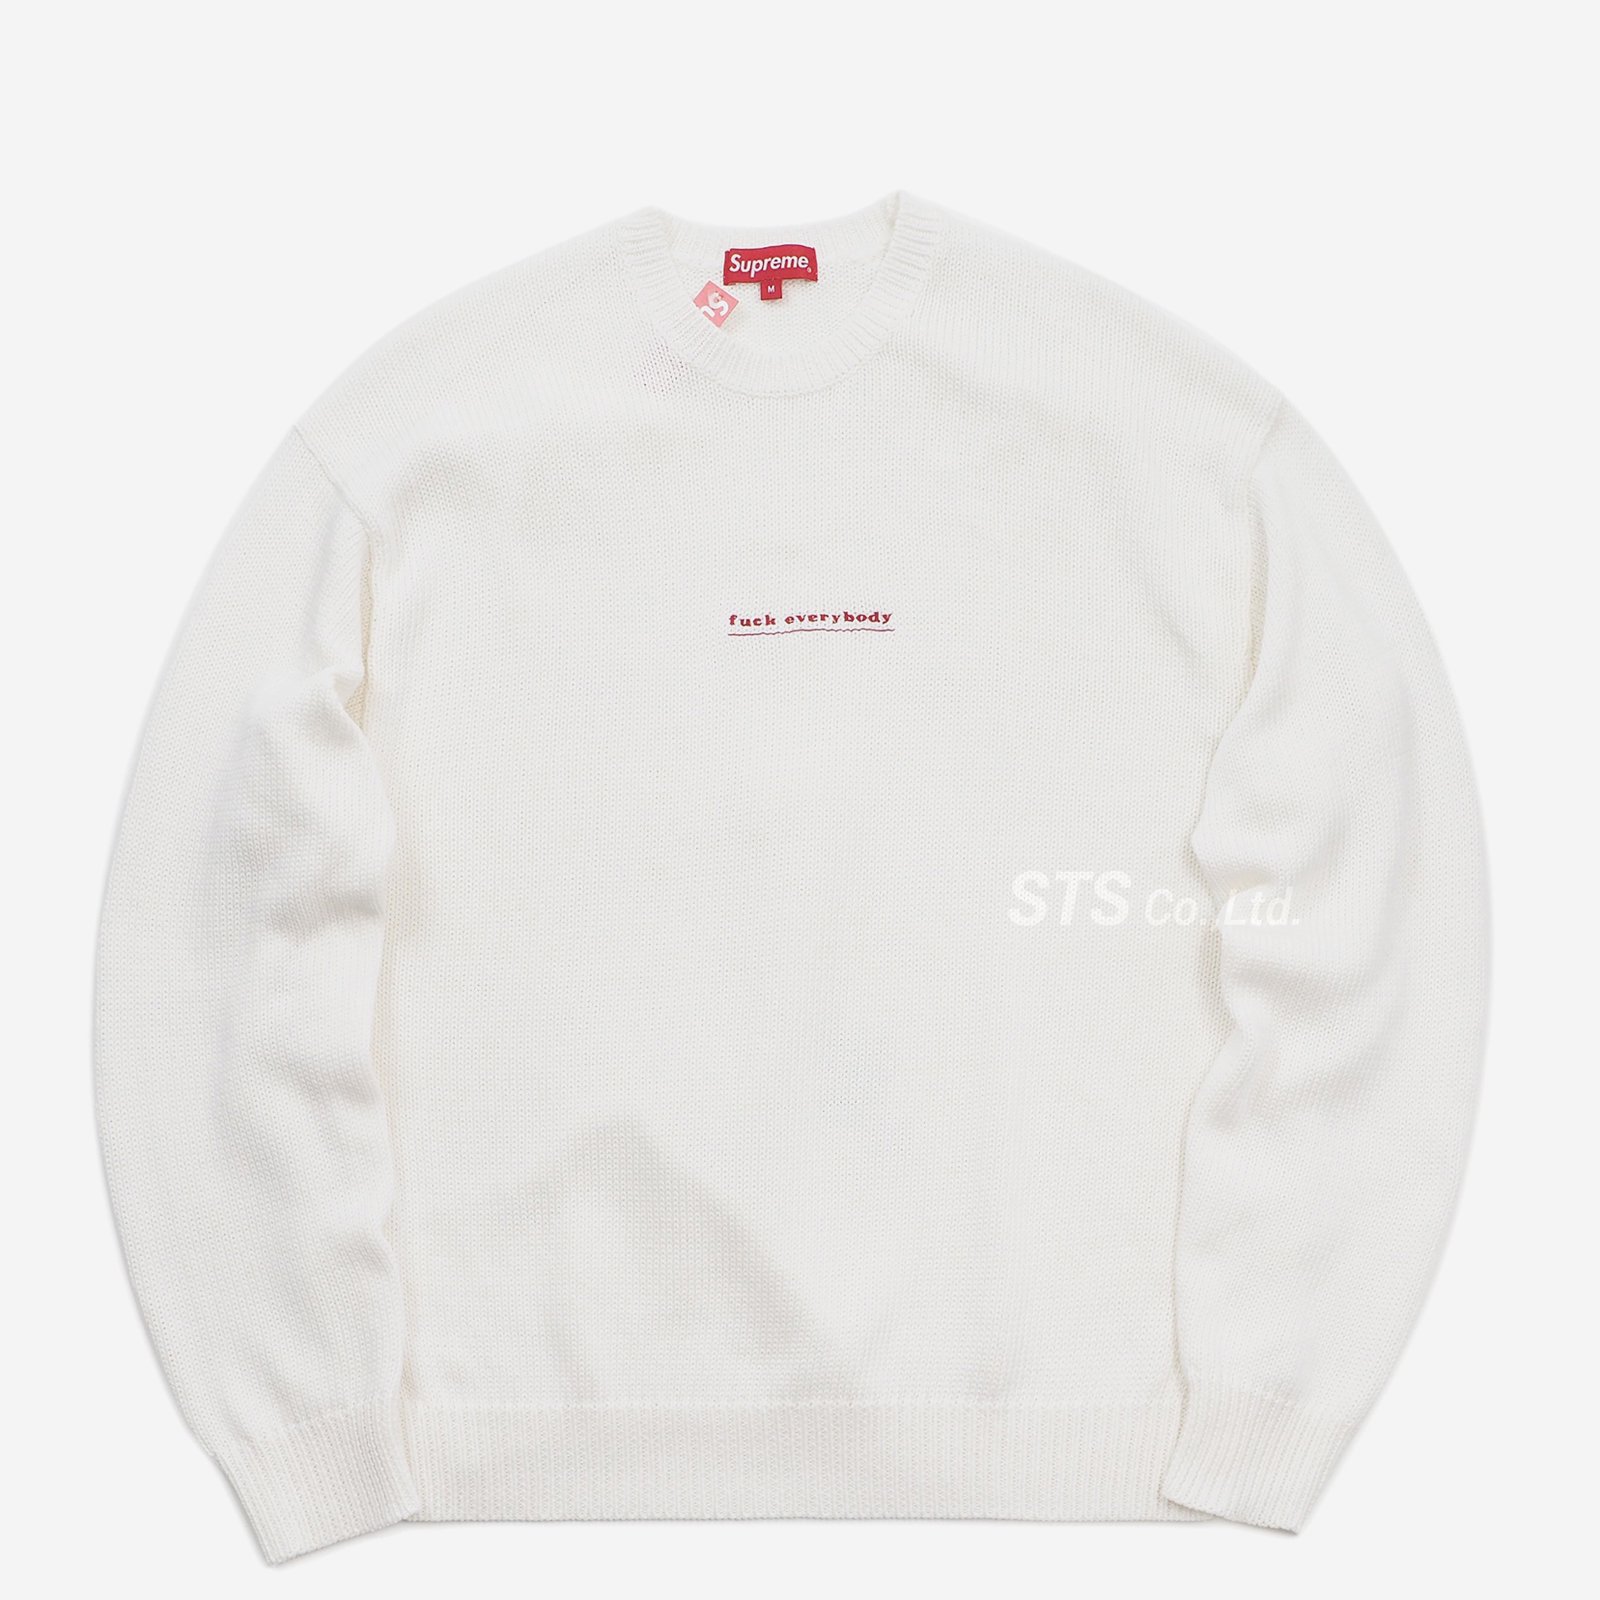 Supreme - Fuck Everybody Sweater - ParkSIDER